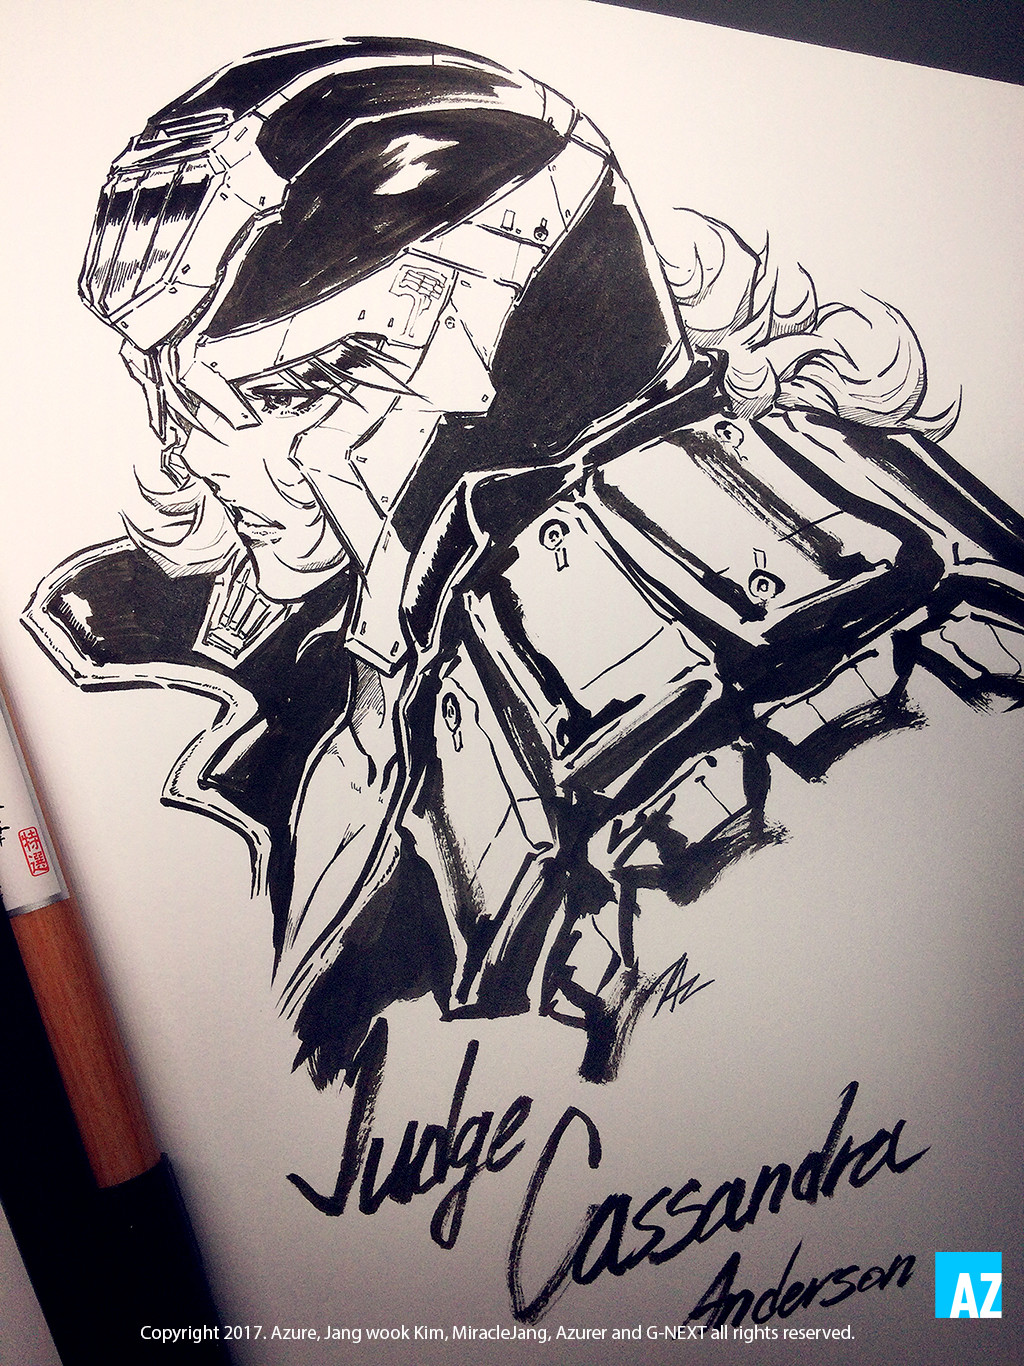 Brush sketch about Judge Dredd characters